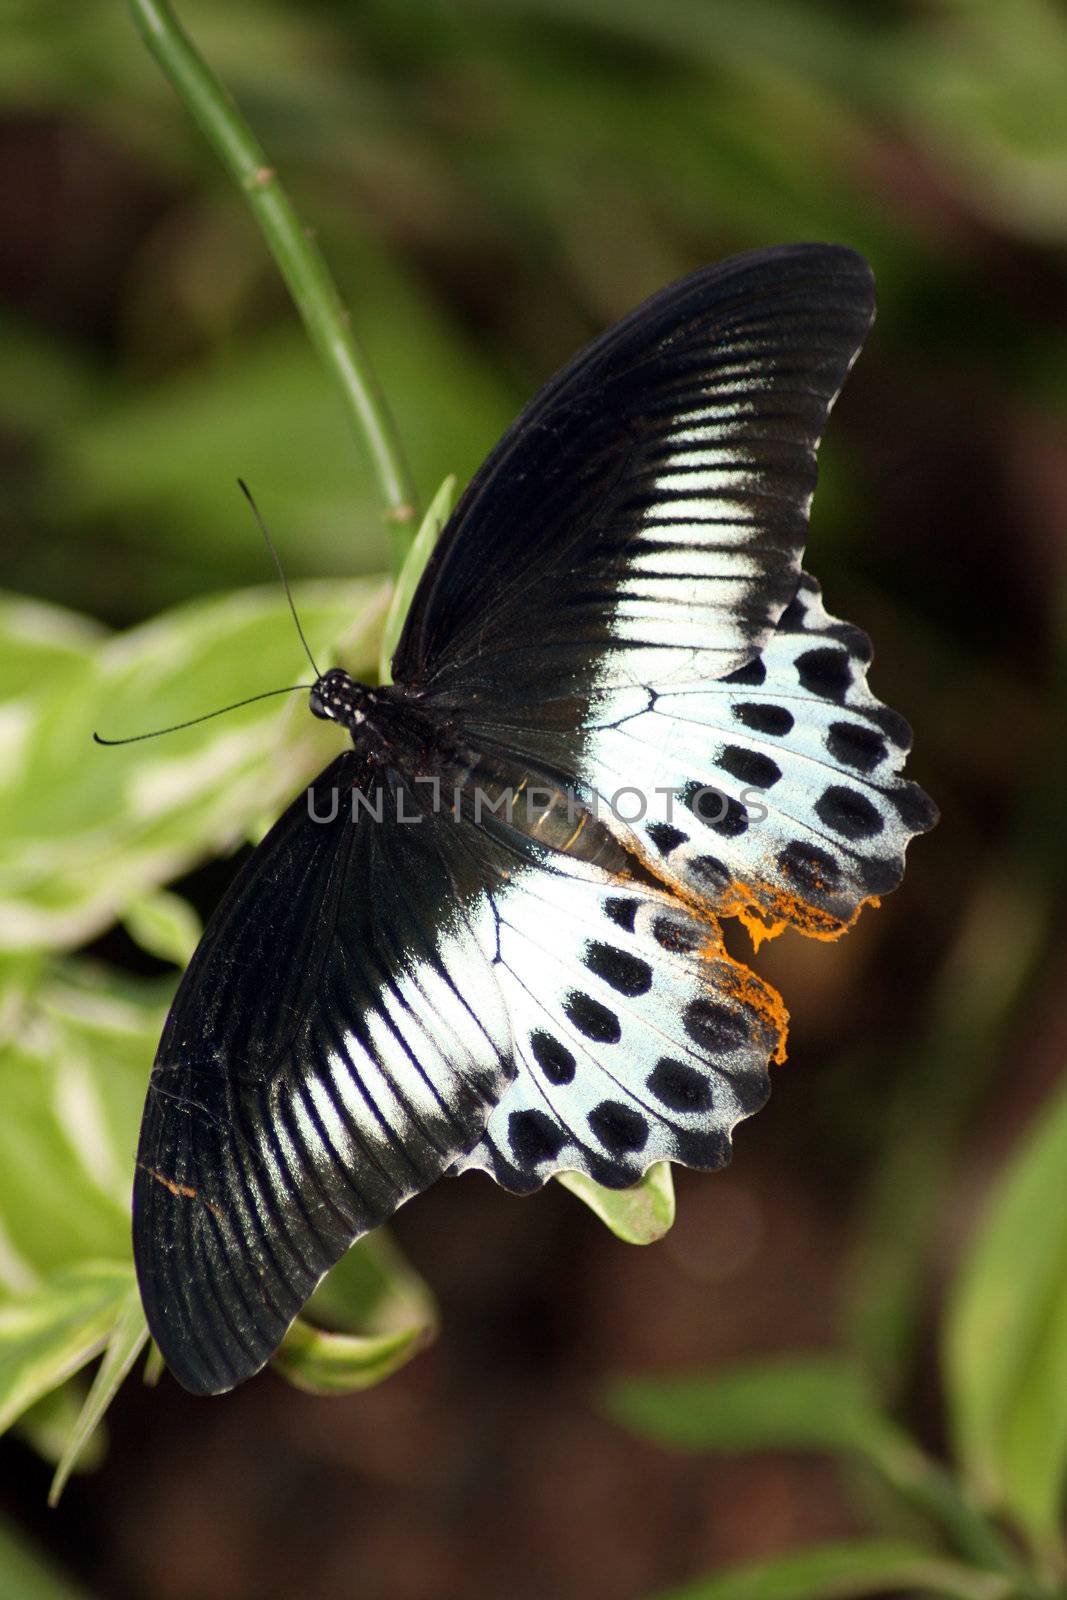 A very rare species of a tropical butterfly with beautiful design on its wings.